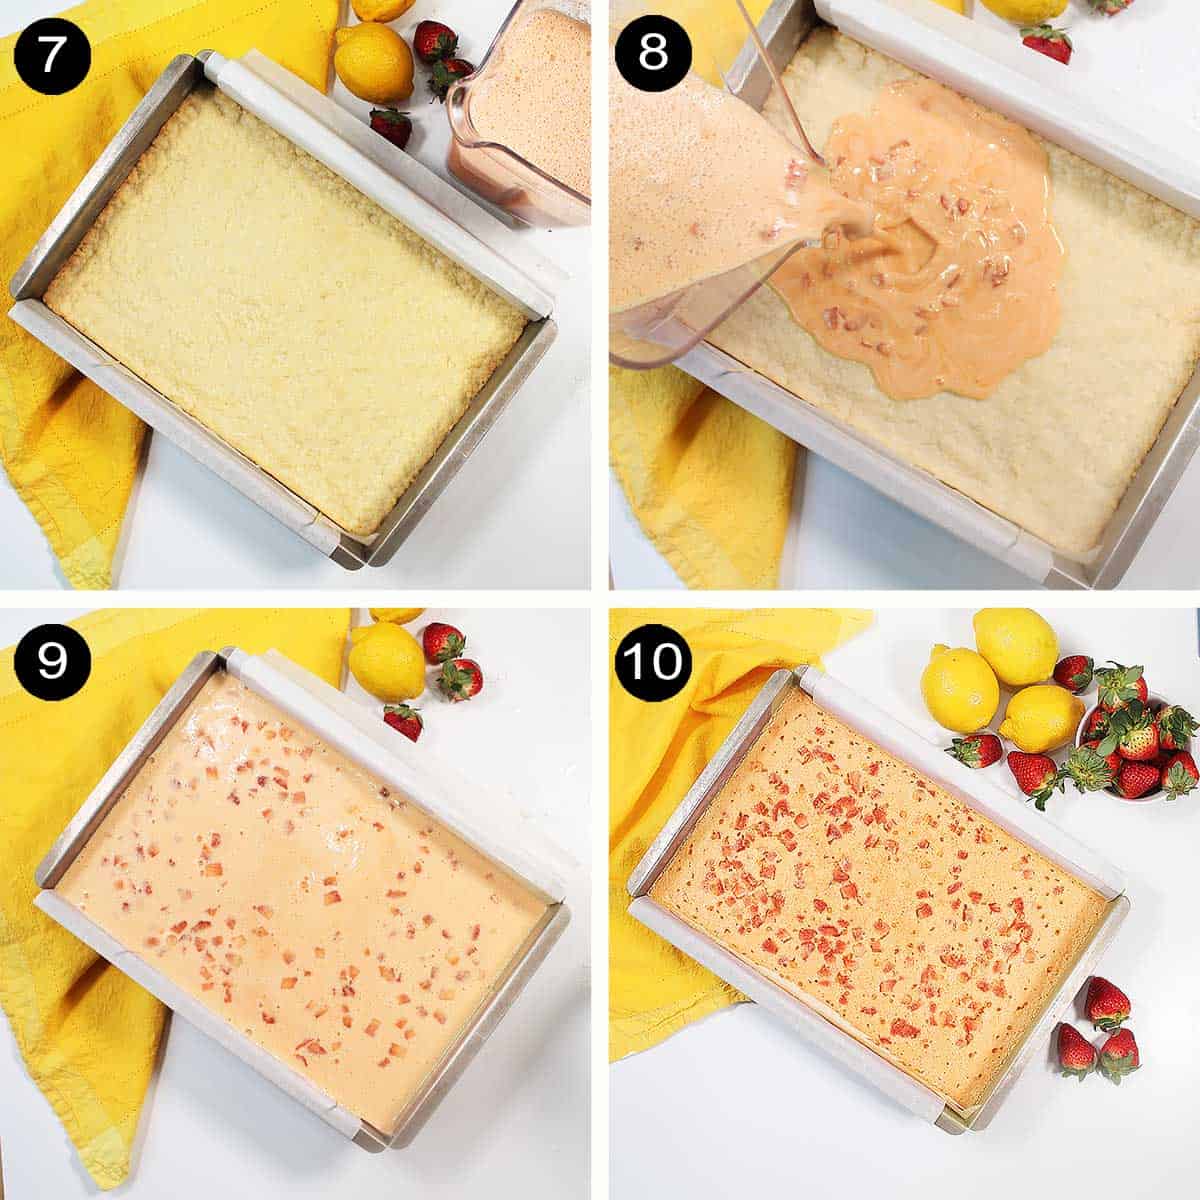 Steps to fill and bake bars.